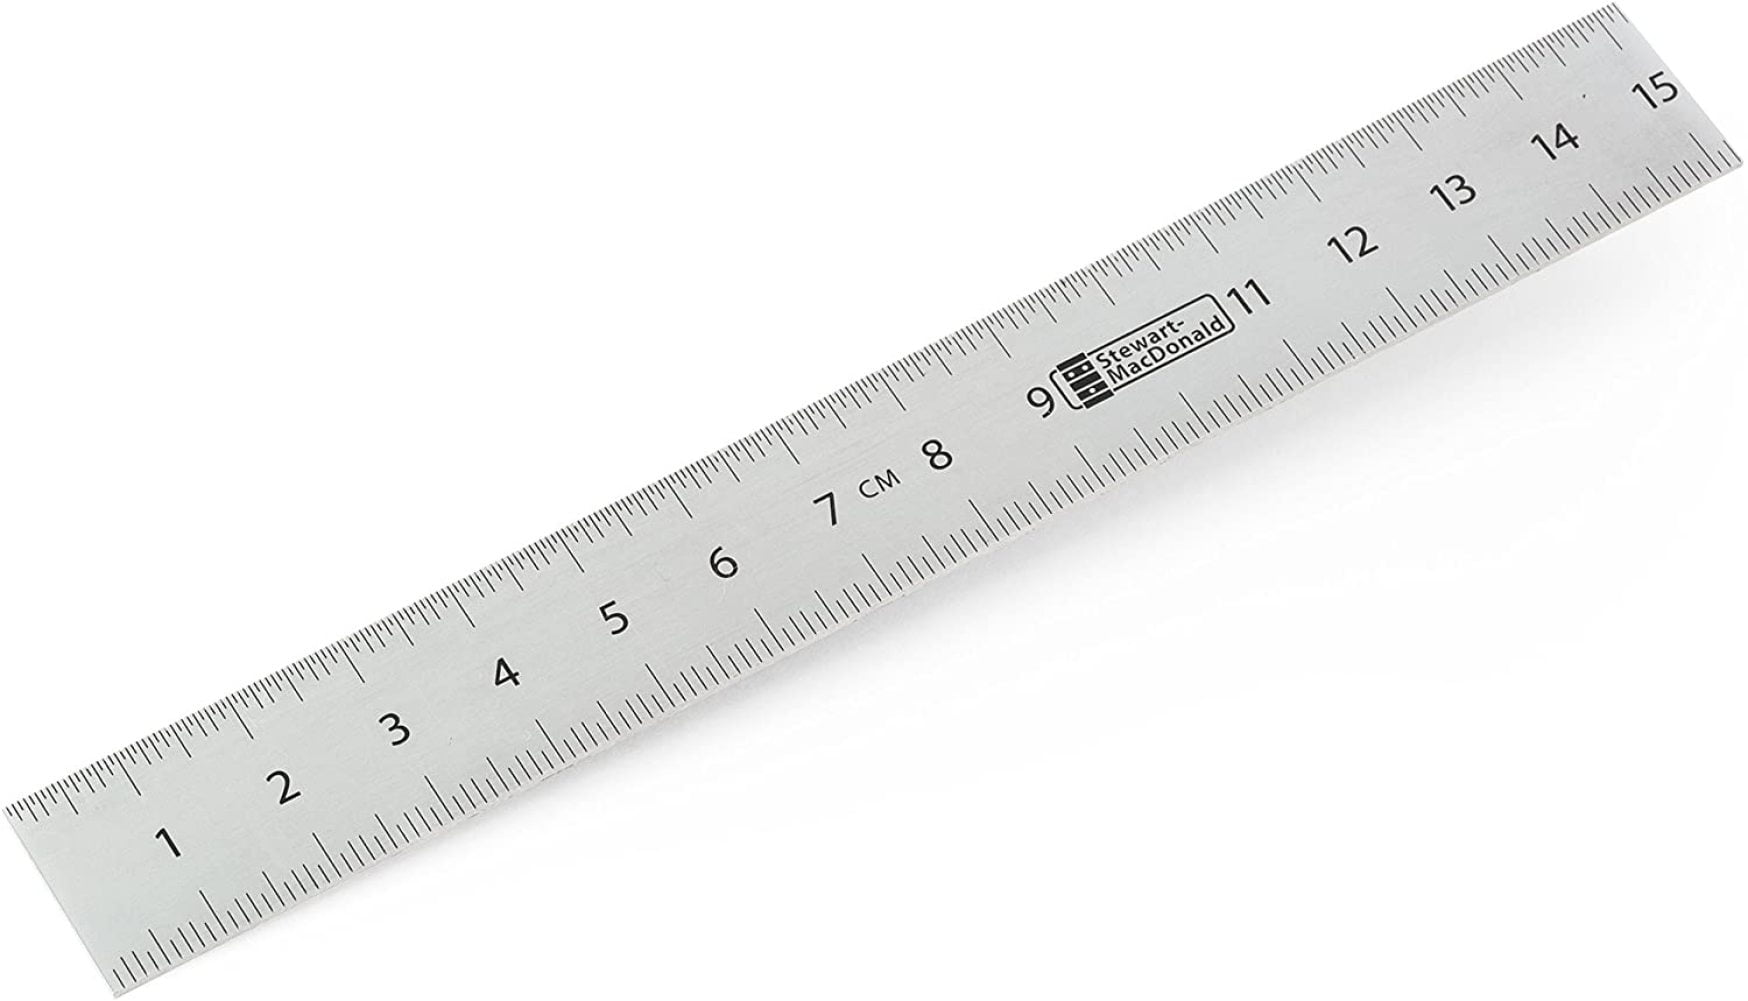 Wholesale black metal ruler With Appropriate Accuracy 